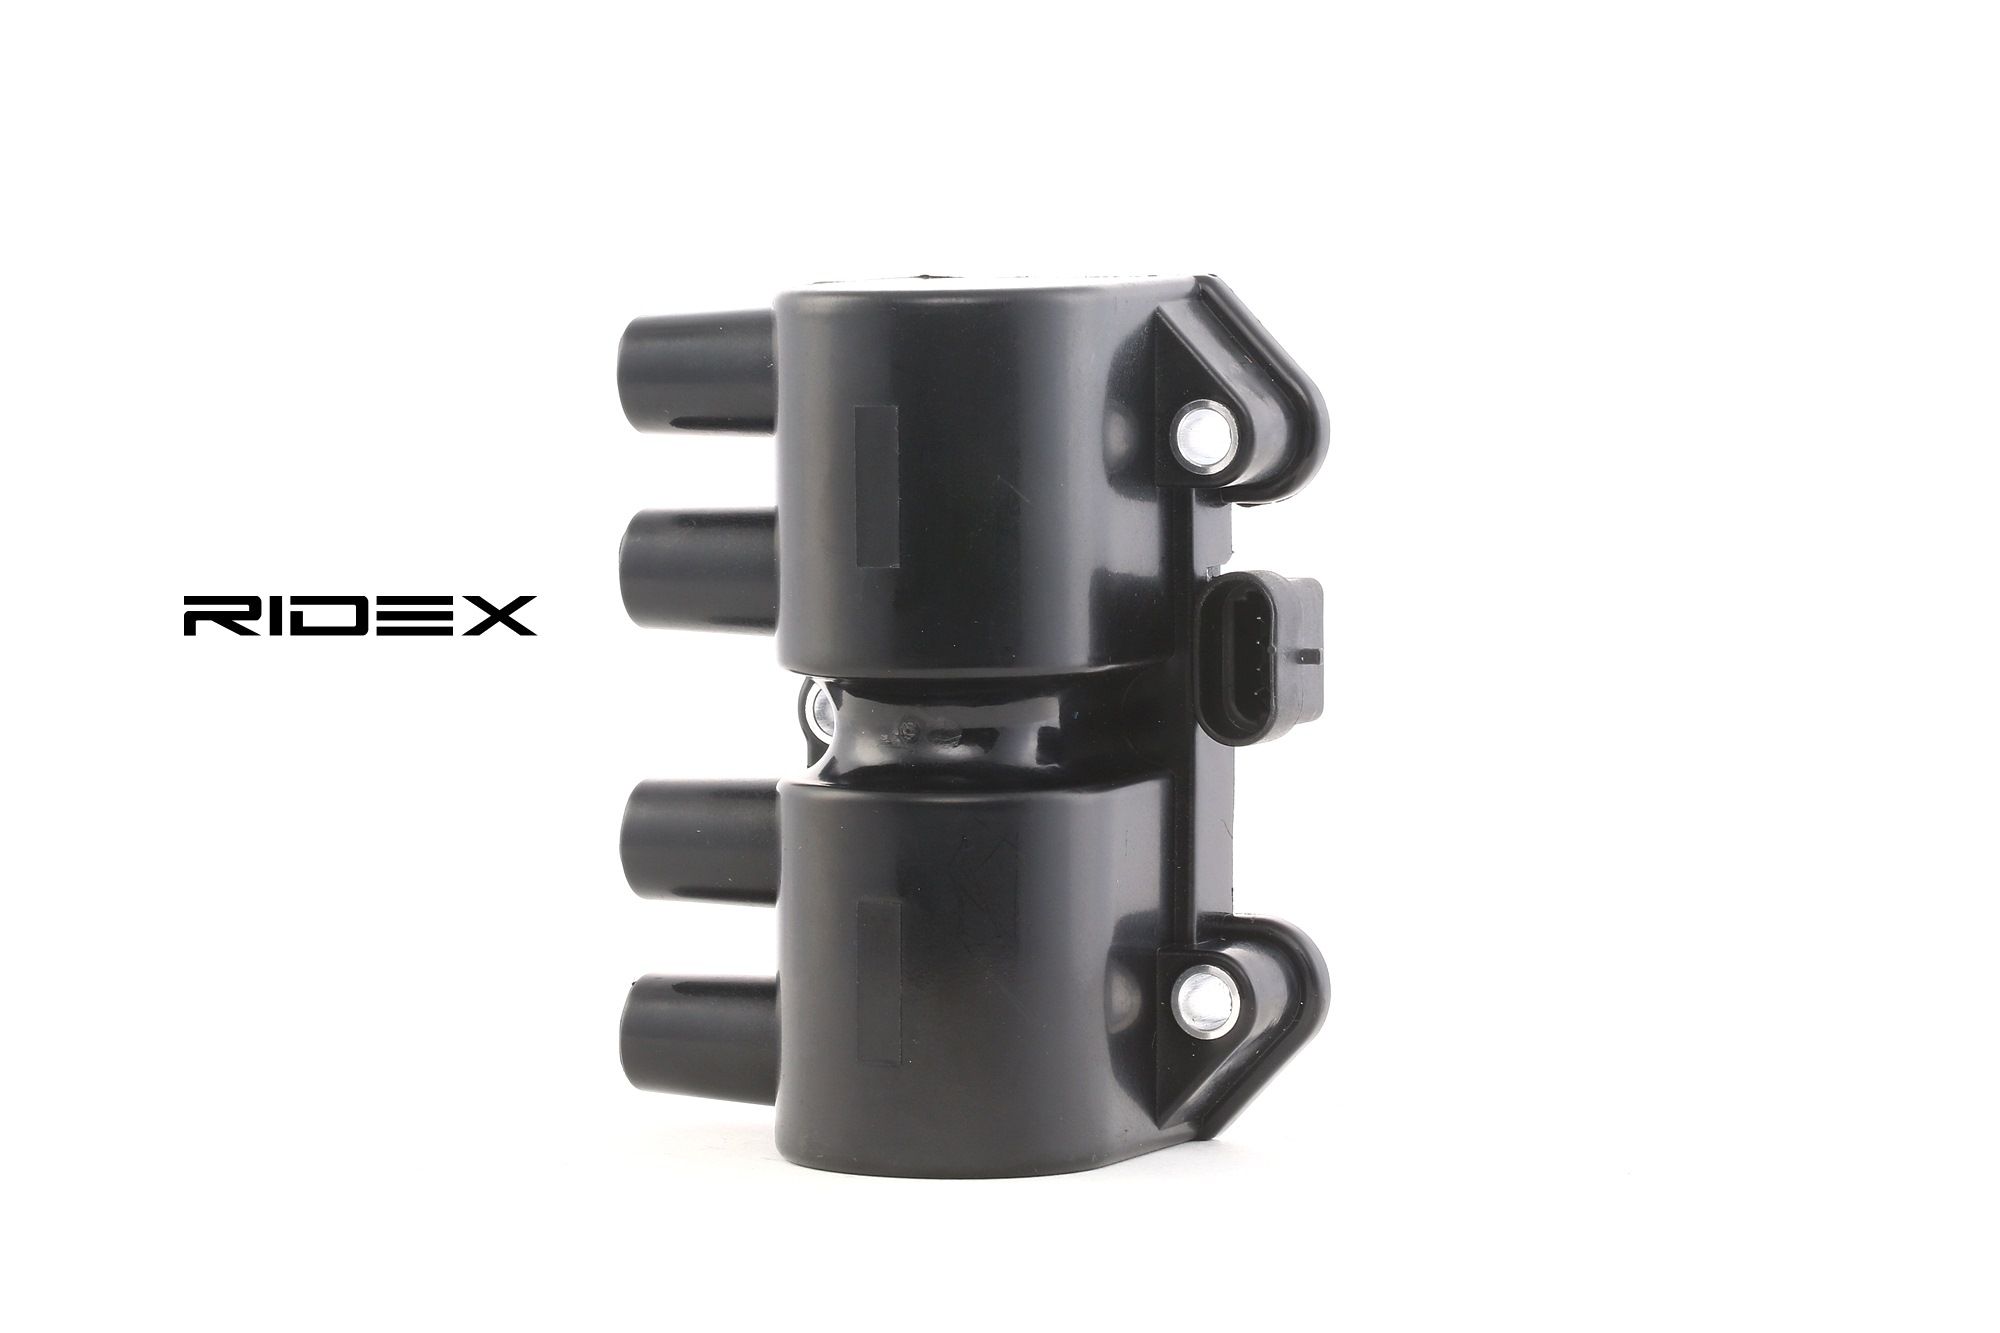 RIDEX 689C0162 Ignition coil 4-pin connector, 12V, Connector Type M4